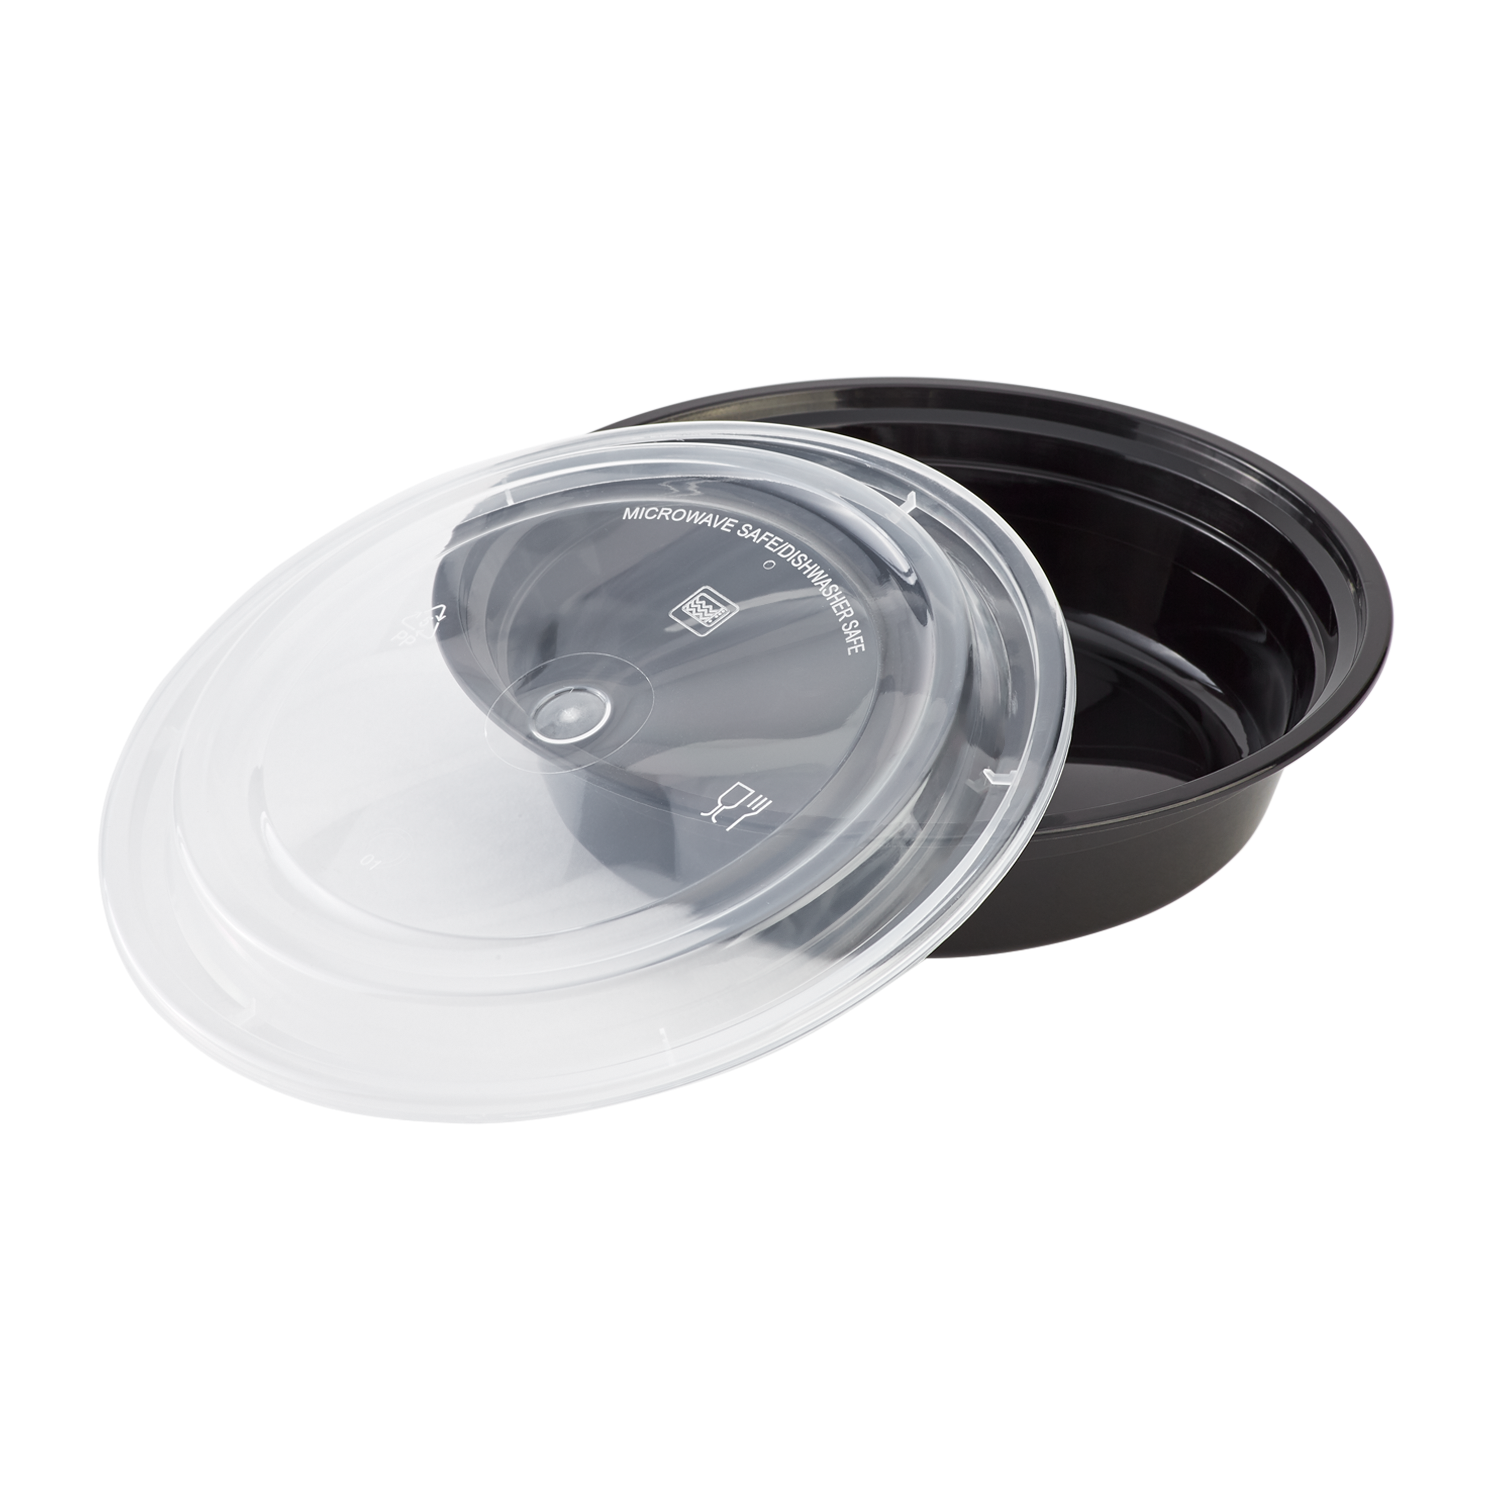 24 oz. BPA Free Food Grade Round Container with Lid (T41024CP) - starting  quantity 25 count - FREE SHIPPING - ePackageSupply